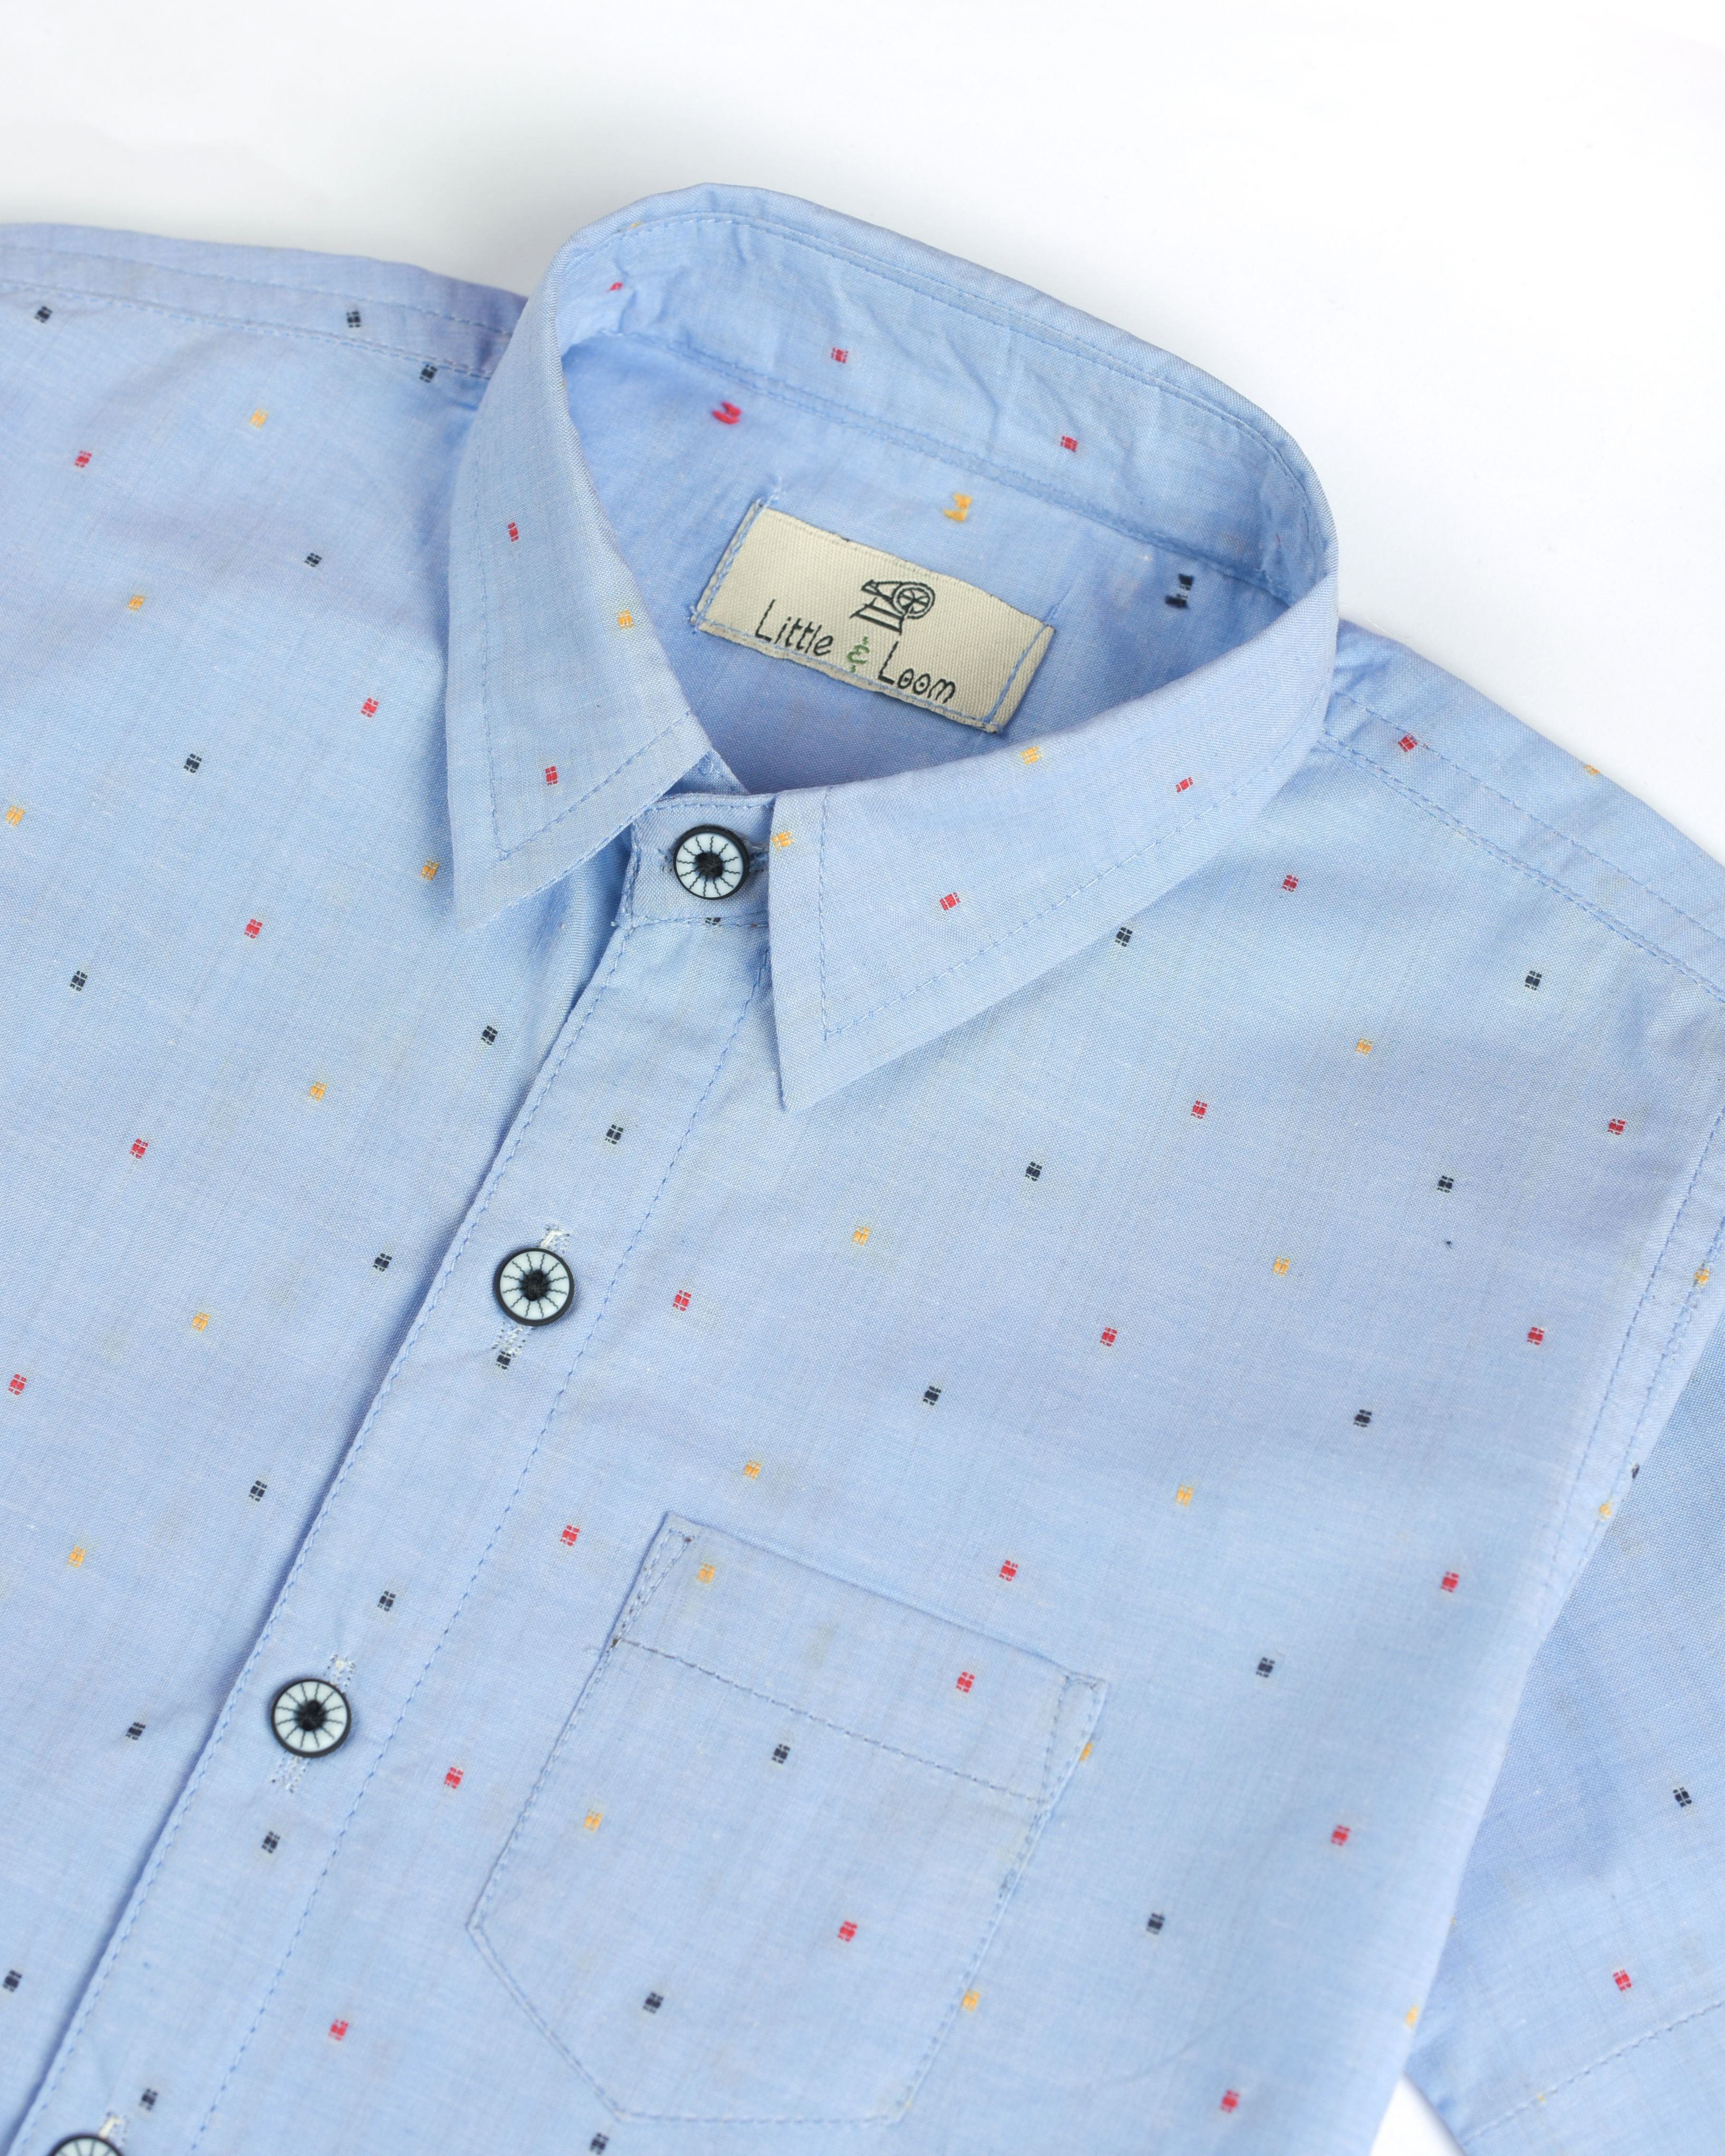 Multi dotted blue shirt